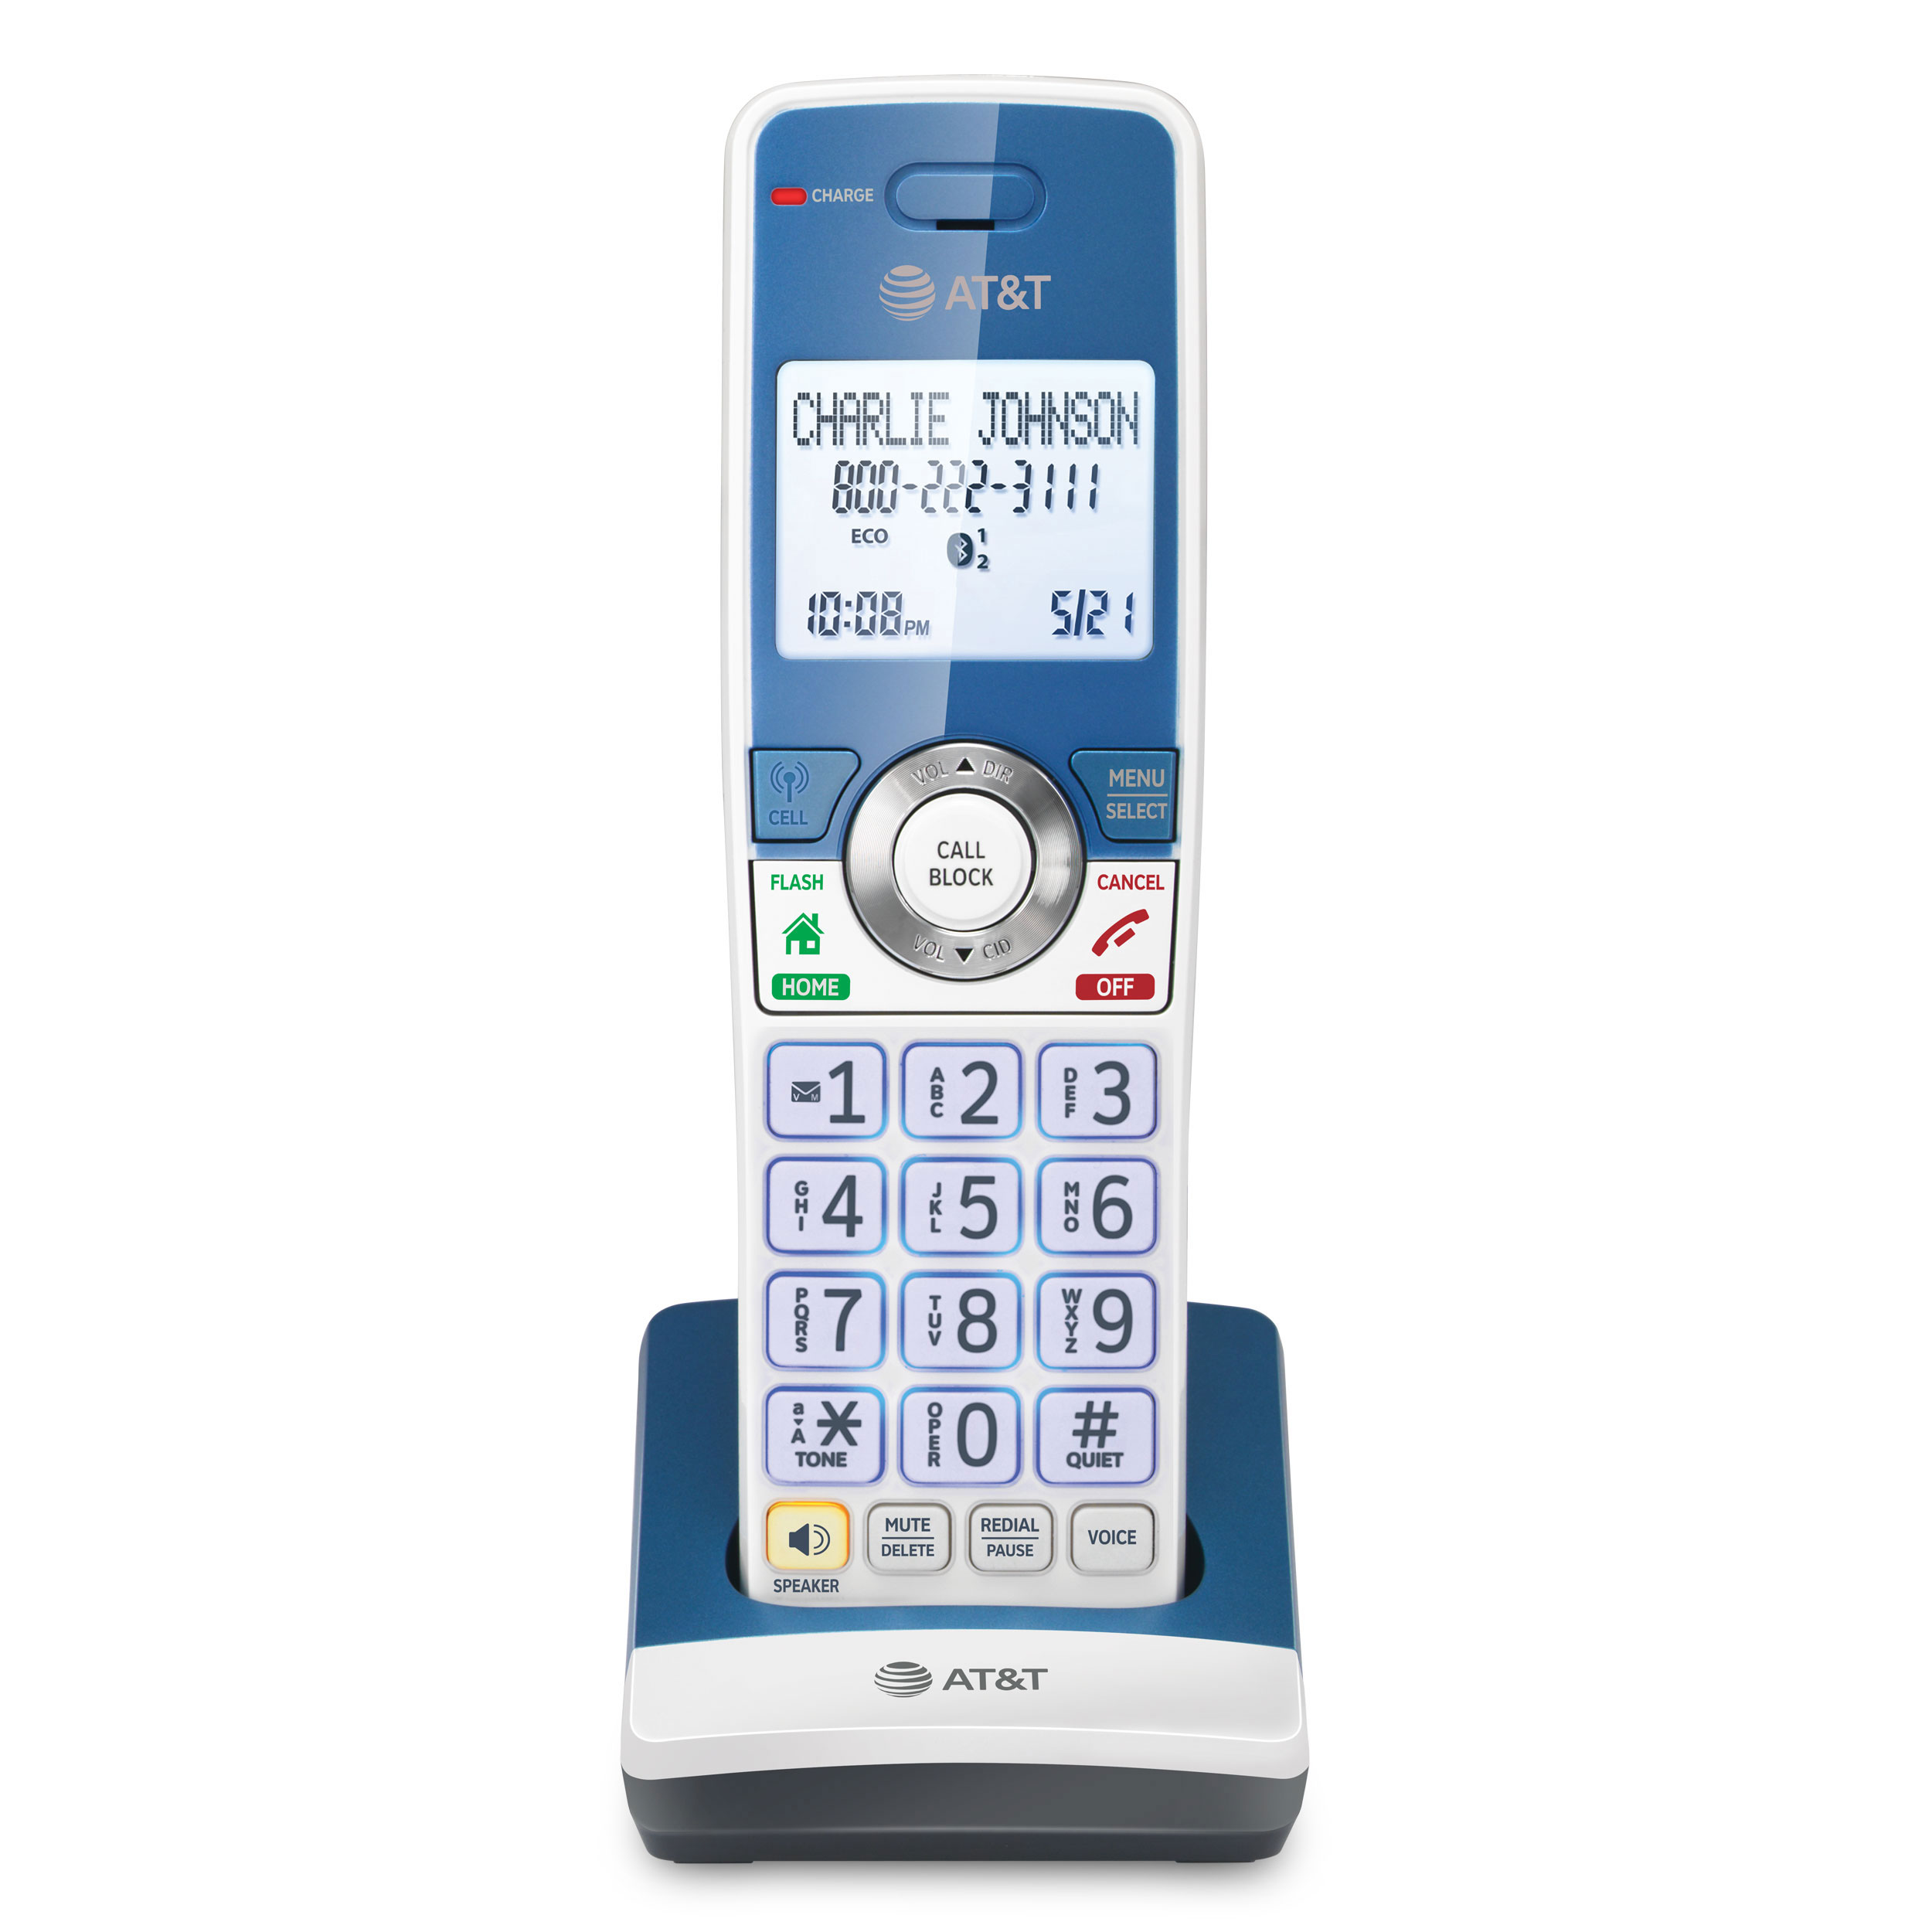 Accessory Handset with Unsurpassed Range, Bluetooth Connect to Cell, and Smart Call Blocker (Blue) - view 1